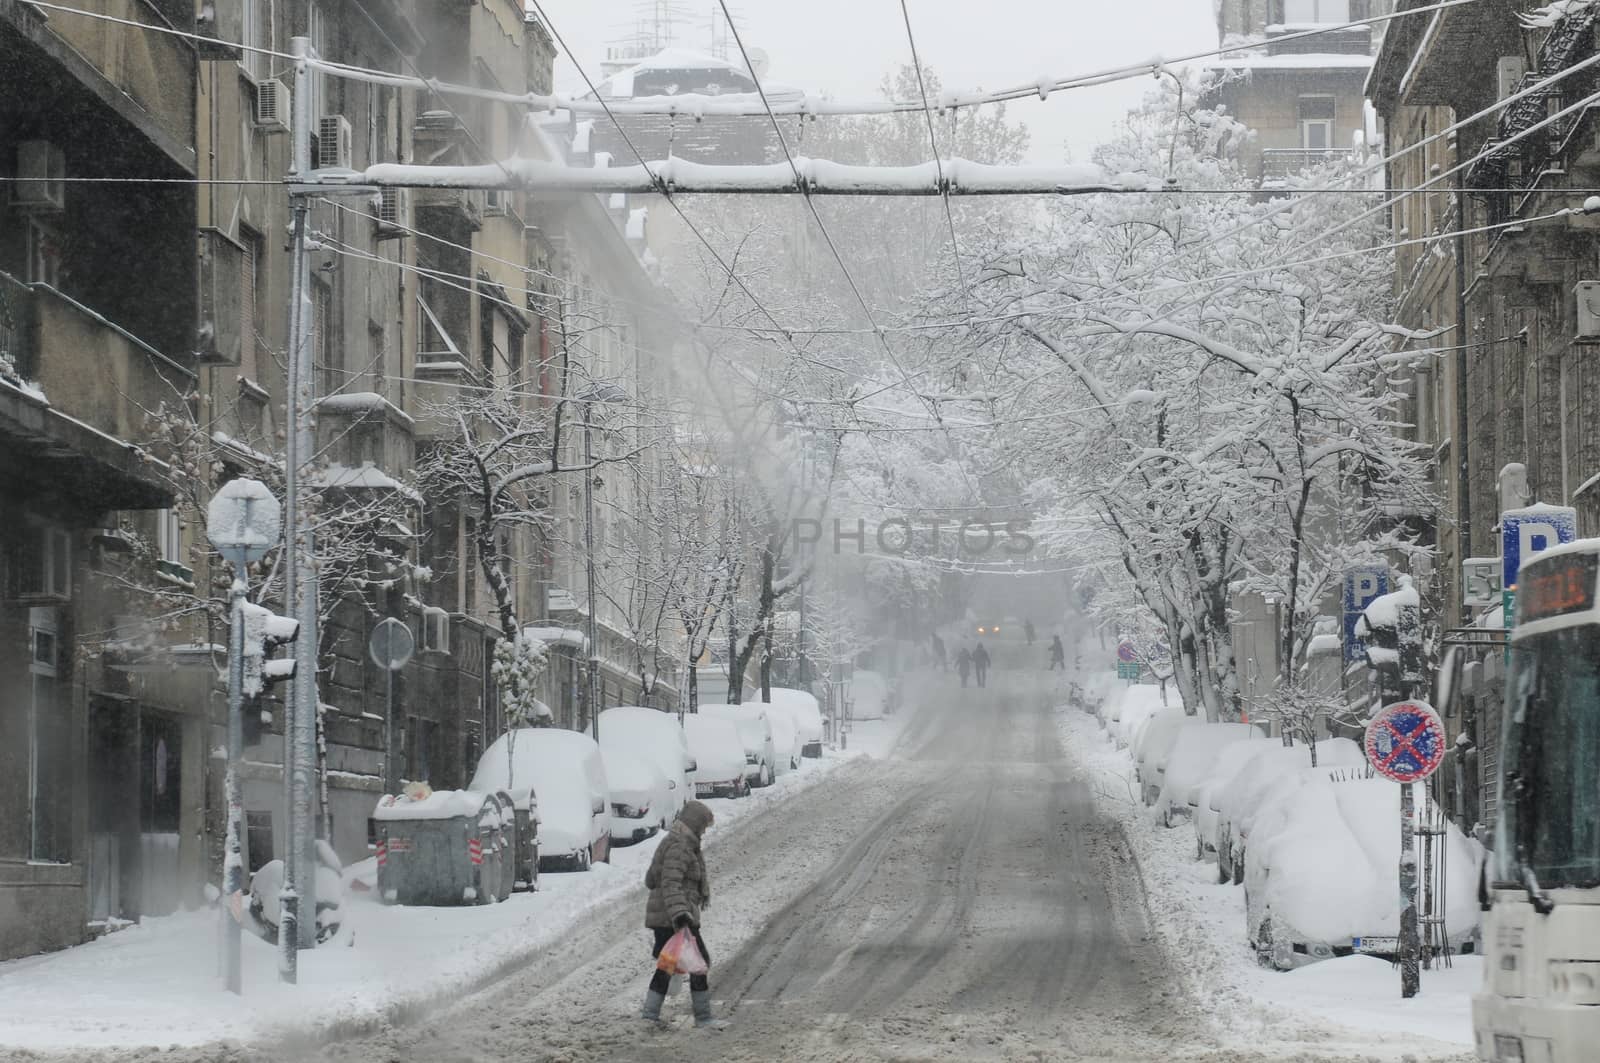 SERBIA, BELGRADE - DECEMBER 9, 2012: Unexpected massive snowfall paralyzed the city. During weekend only small number of snow services are working